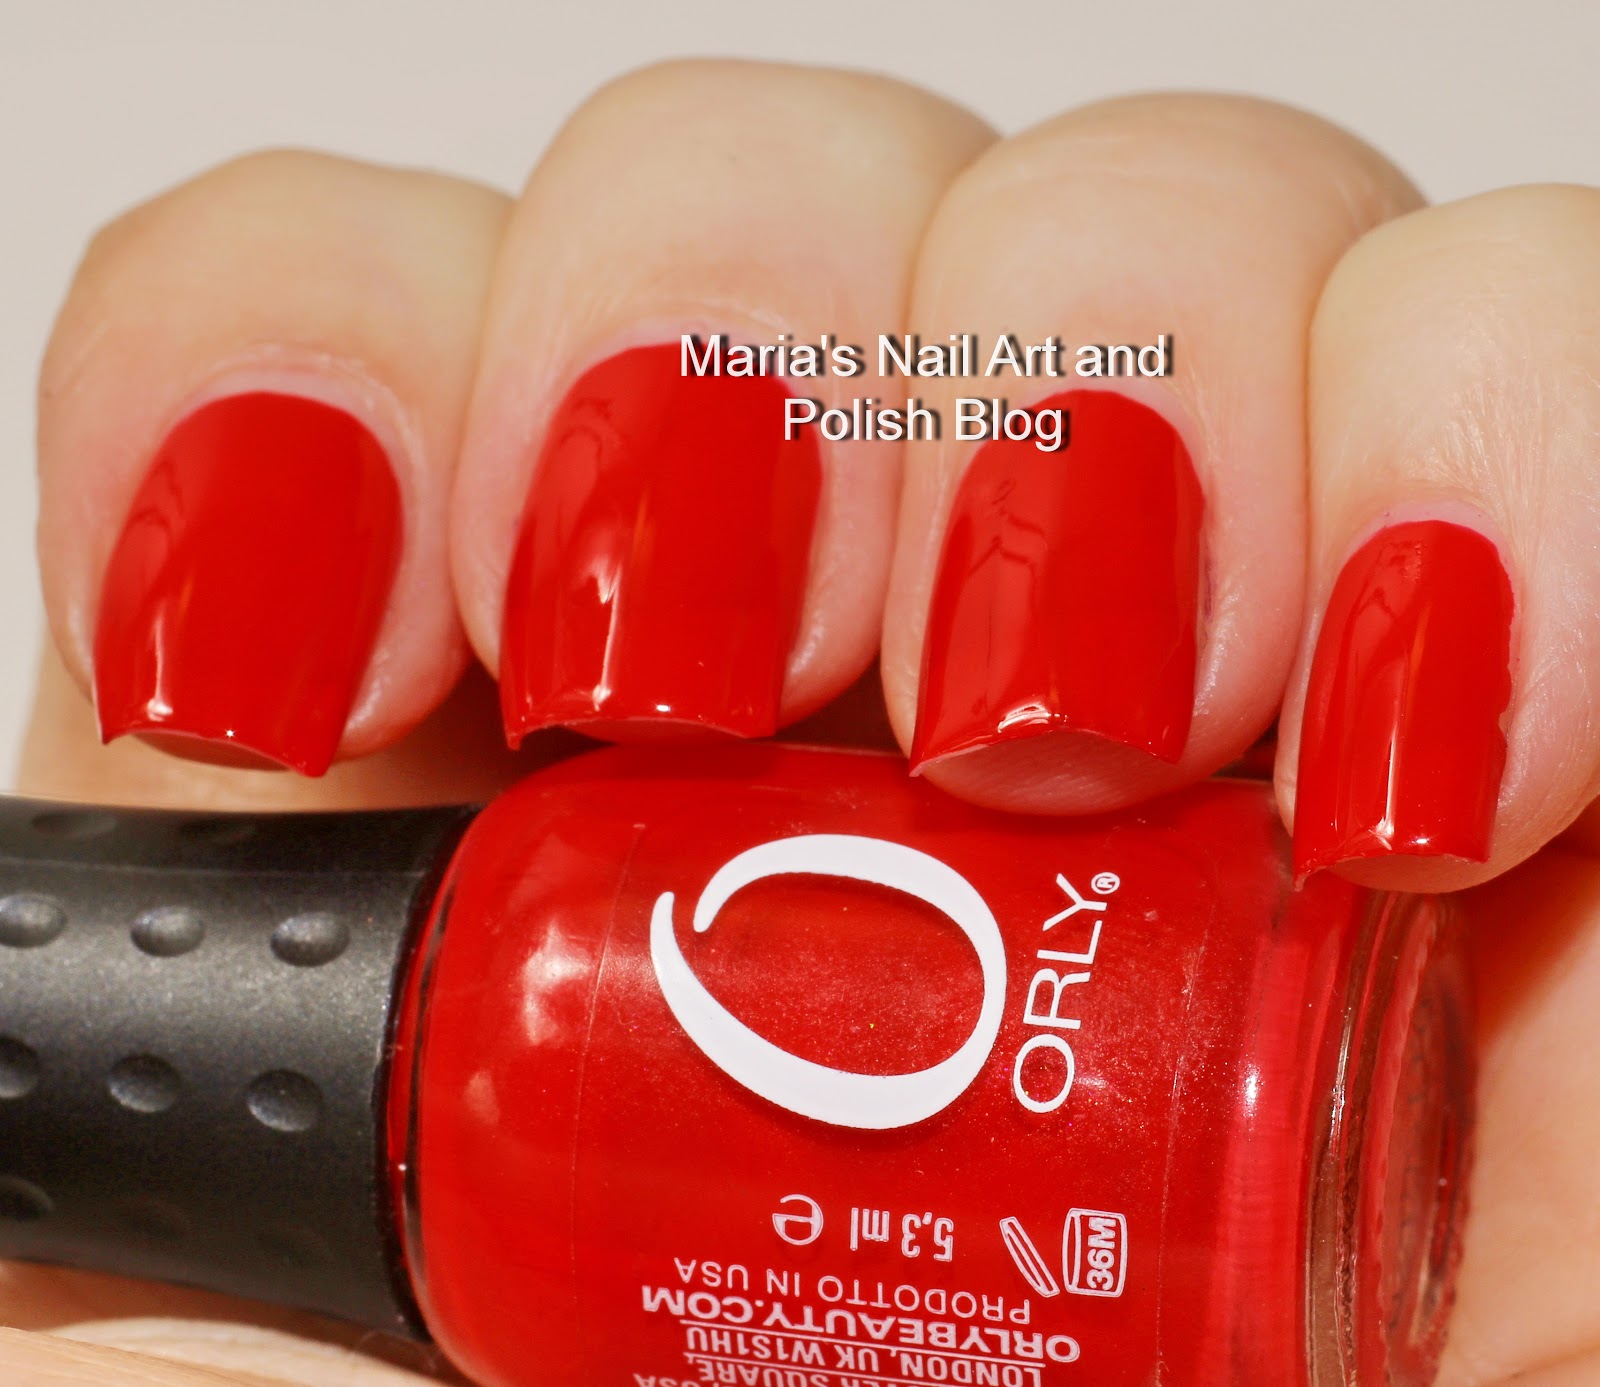 Monroe's Red — ORLY+